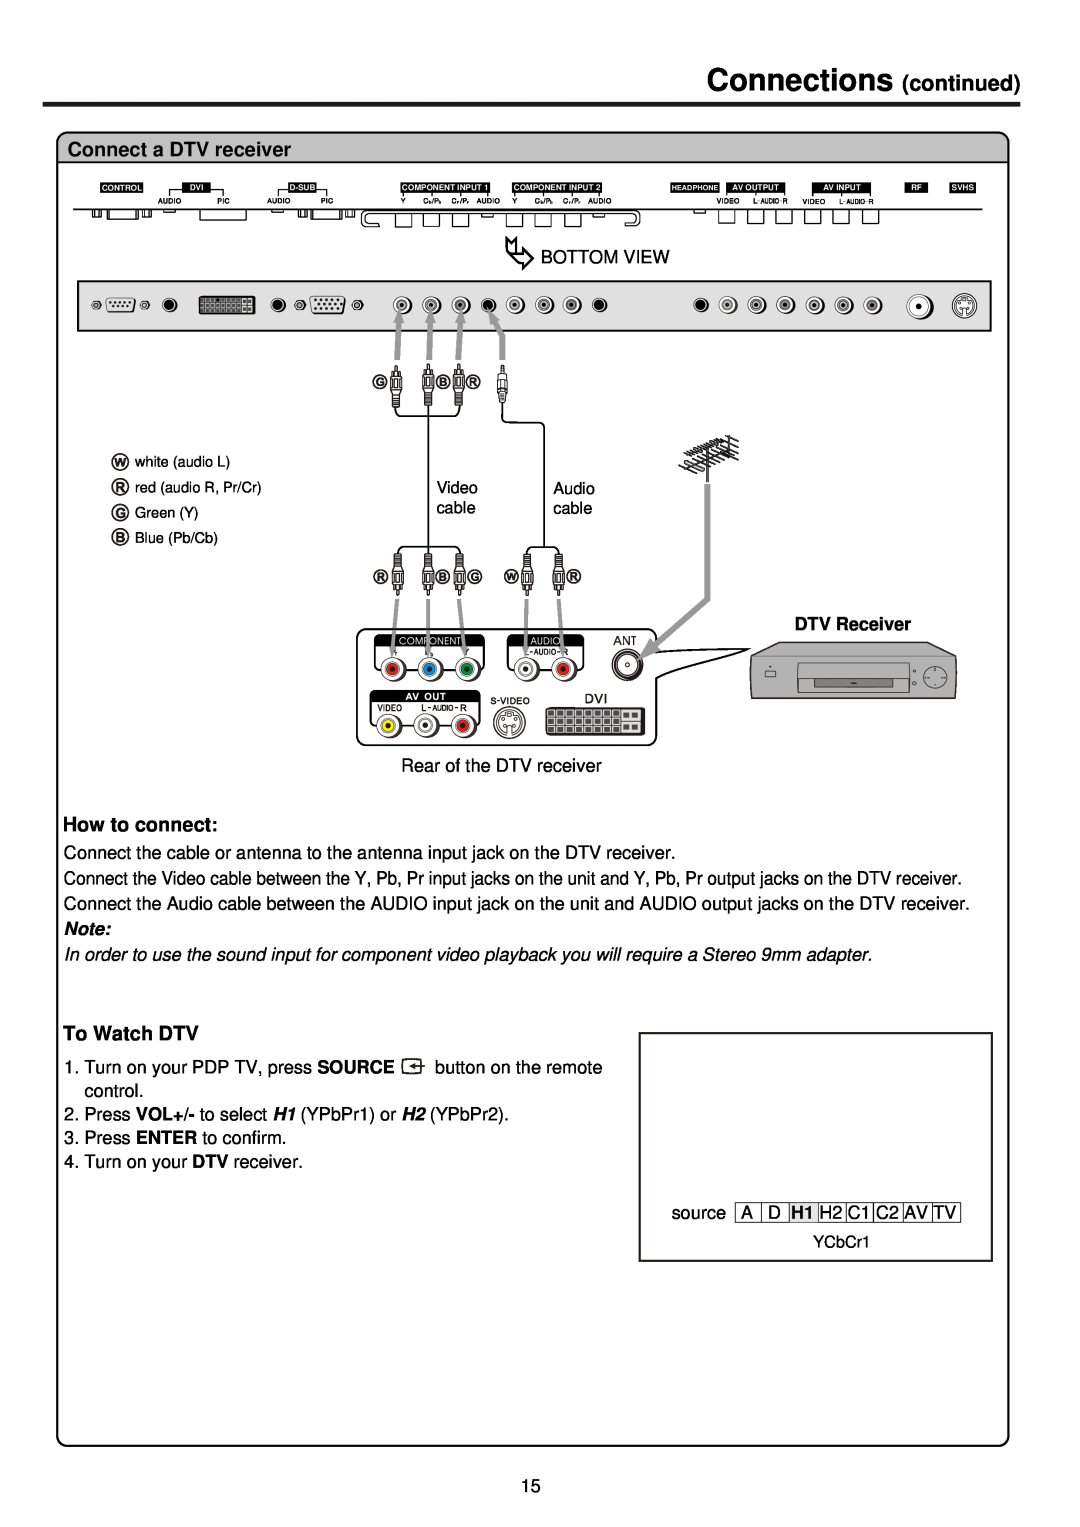 Palsonic PDP4200 owner manual Connect a DTV receiver, To Watch DTV, Connections continued, How to connect, DTV Receiver 